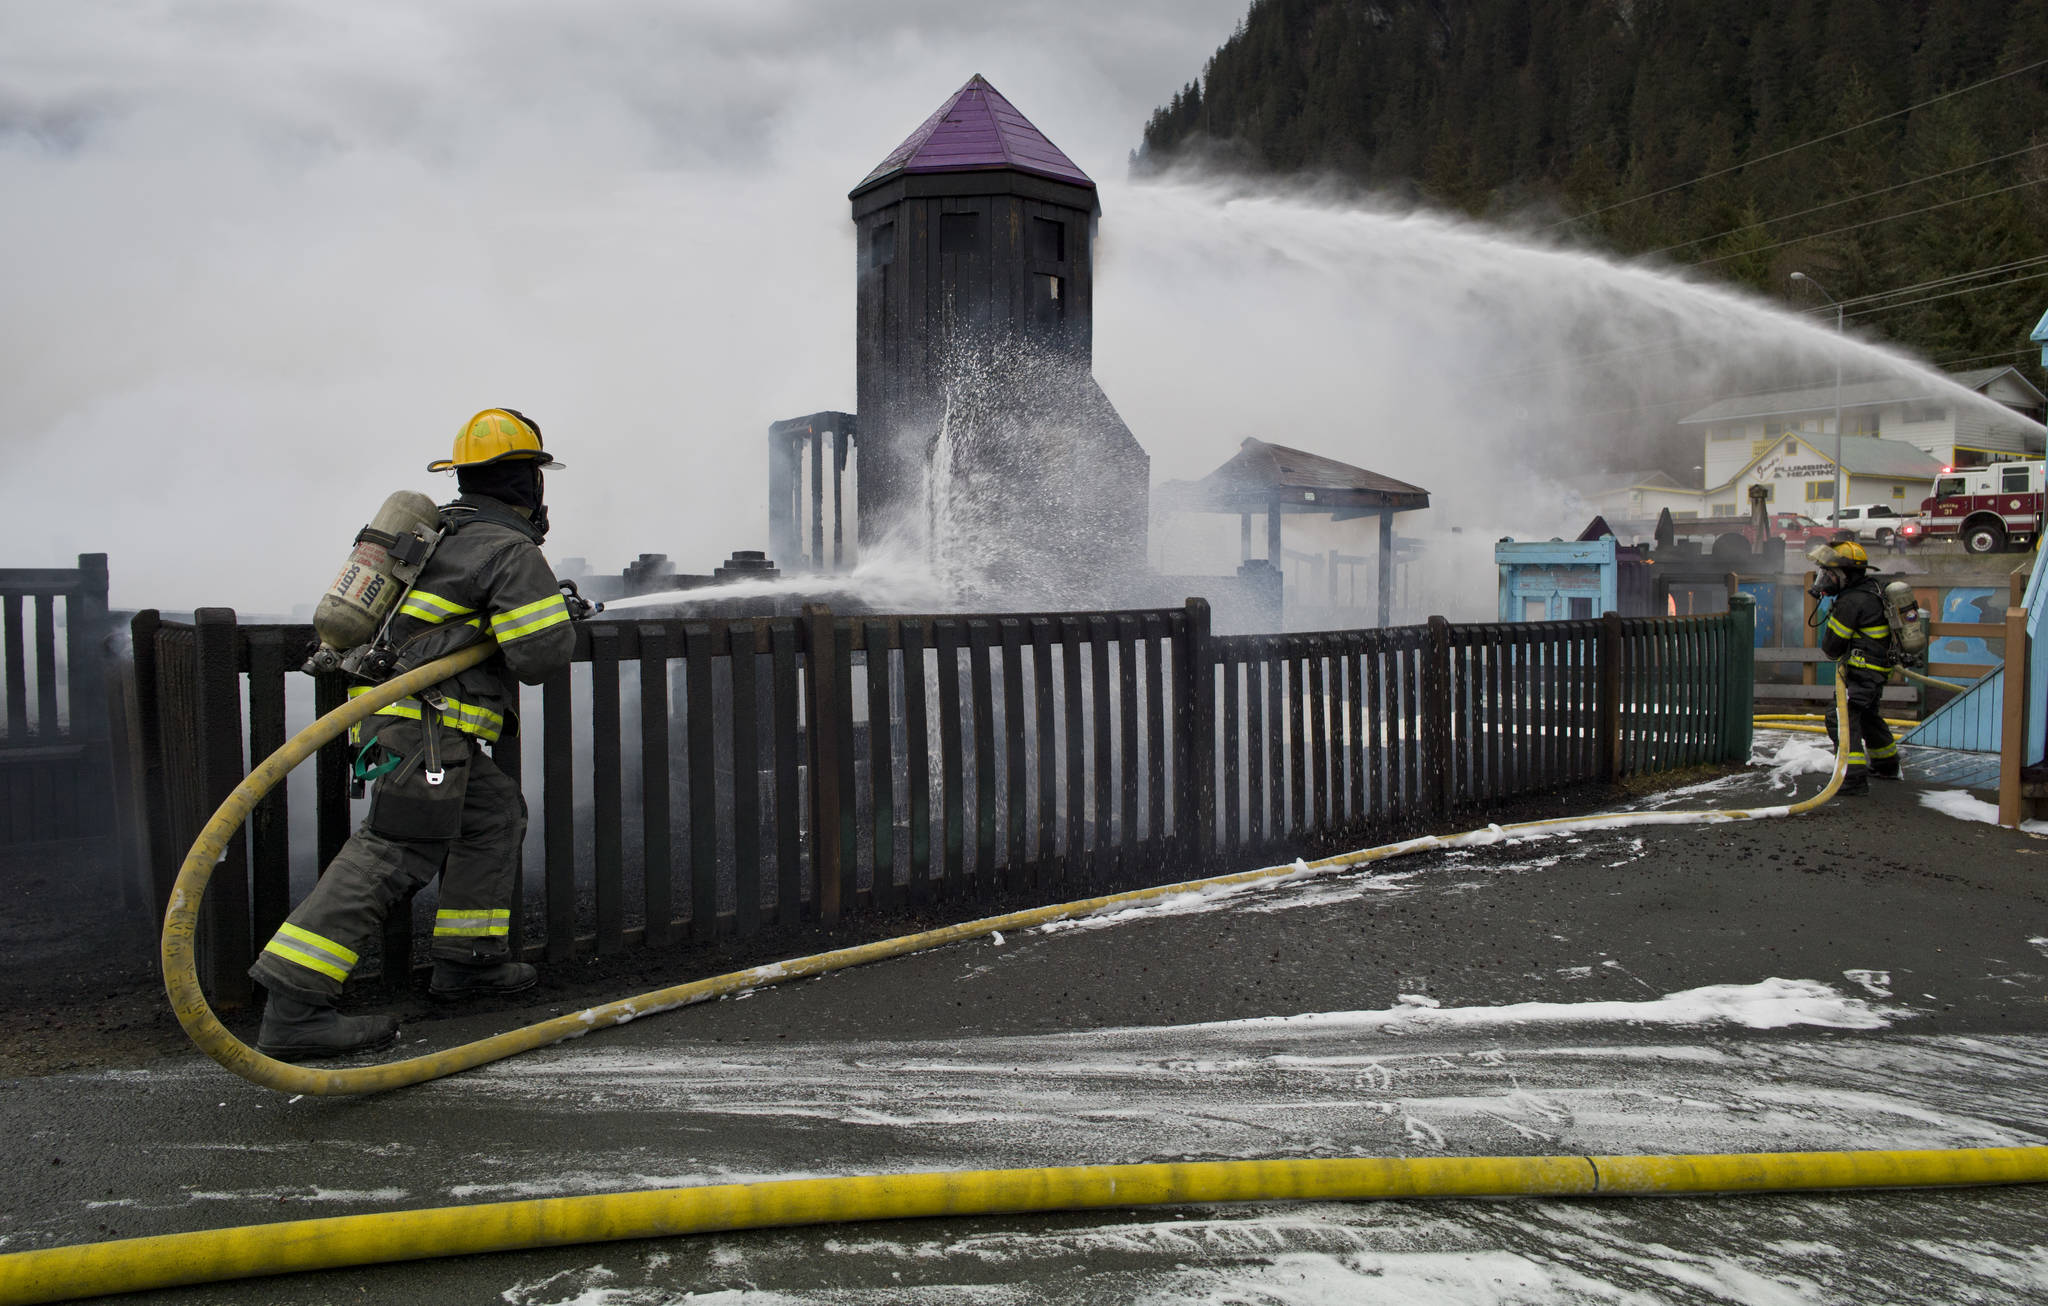 Capital City Fire/Rescue personnel fire a fire that consumes the playground at Twin Lakes on Monday, April 24, 2017. (Michael Penn | Juneau Empire)